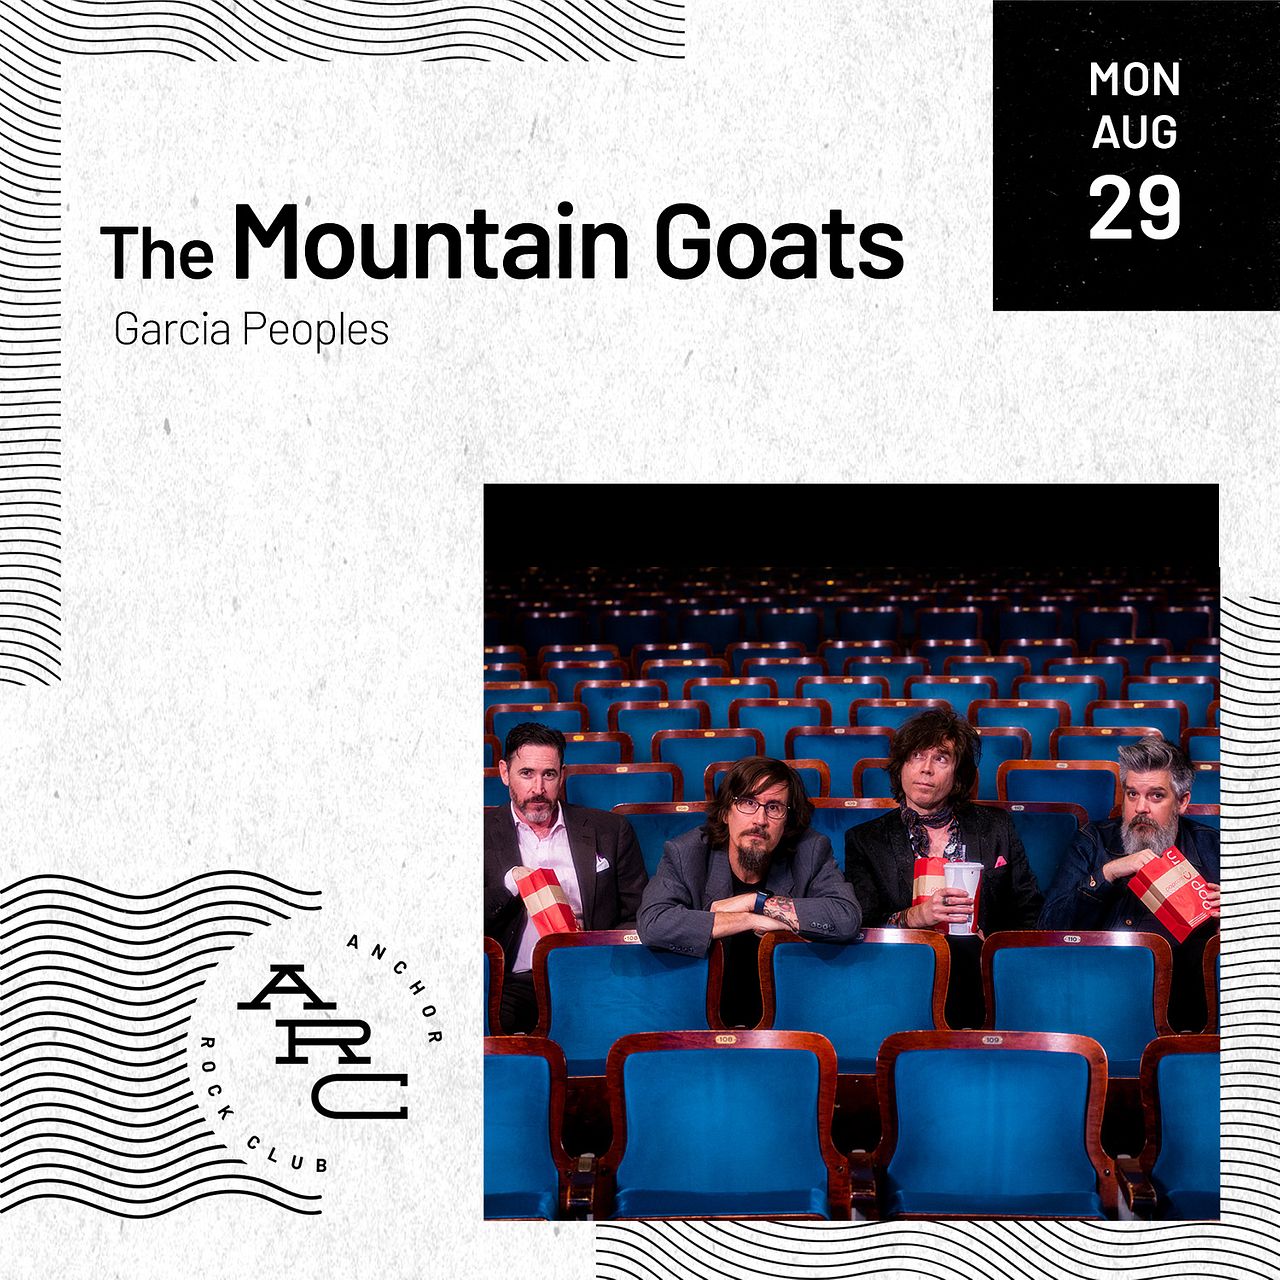 The Mountain Goats Tickets at Anchor Rock Club in Atlantic City by